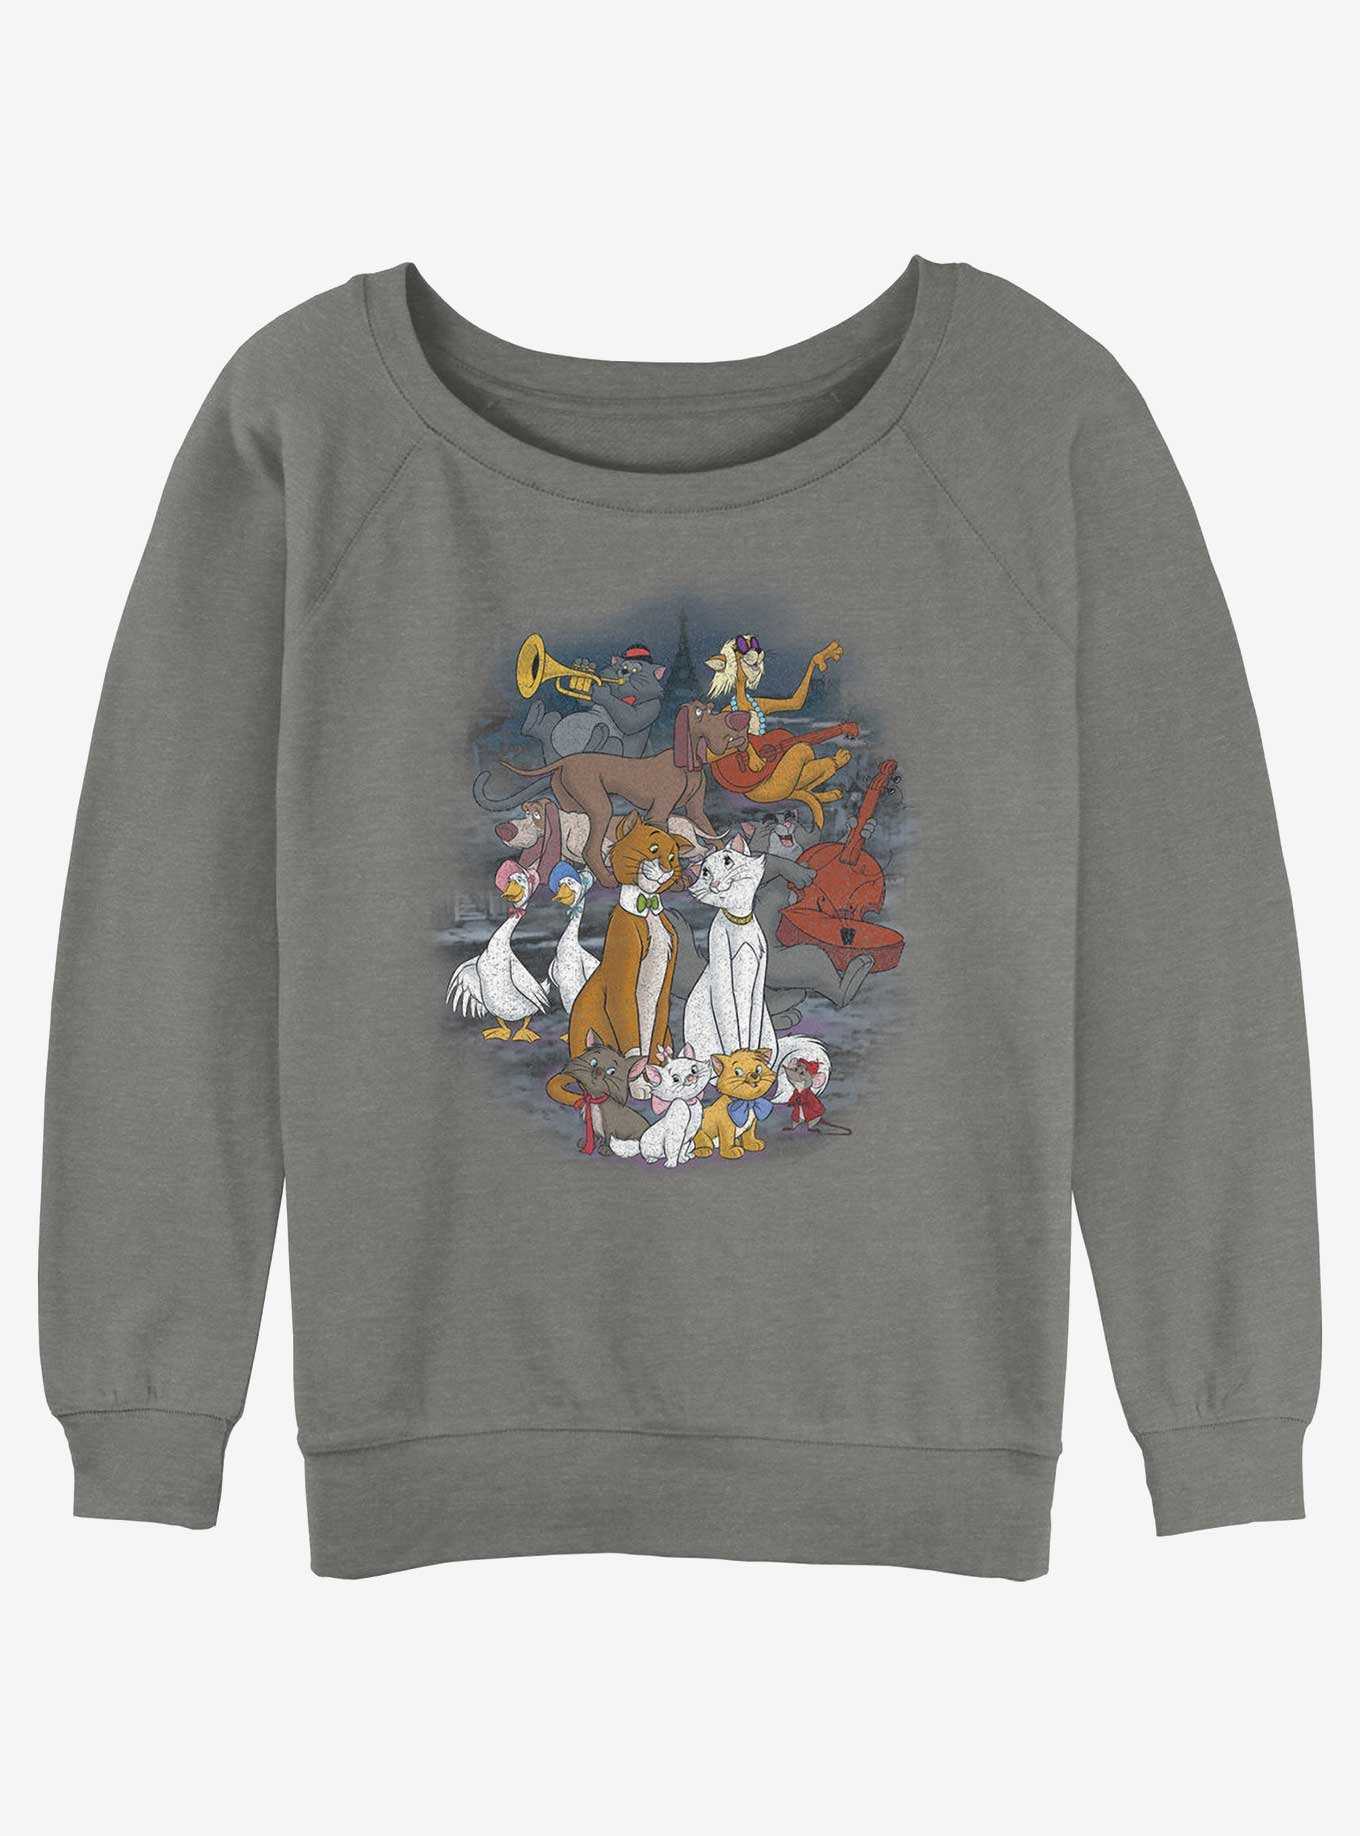 Plushies, Aristocats Merch Hot Shirts | & OFFICIAL Topic